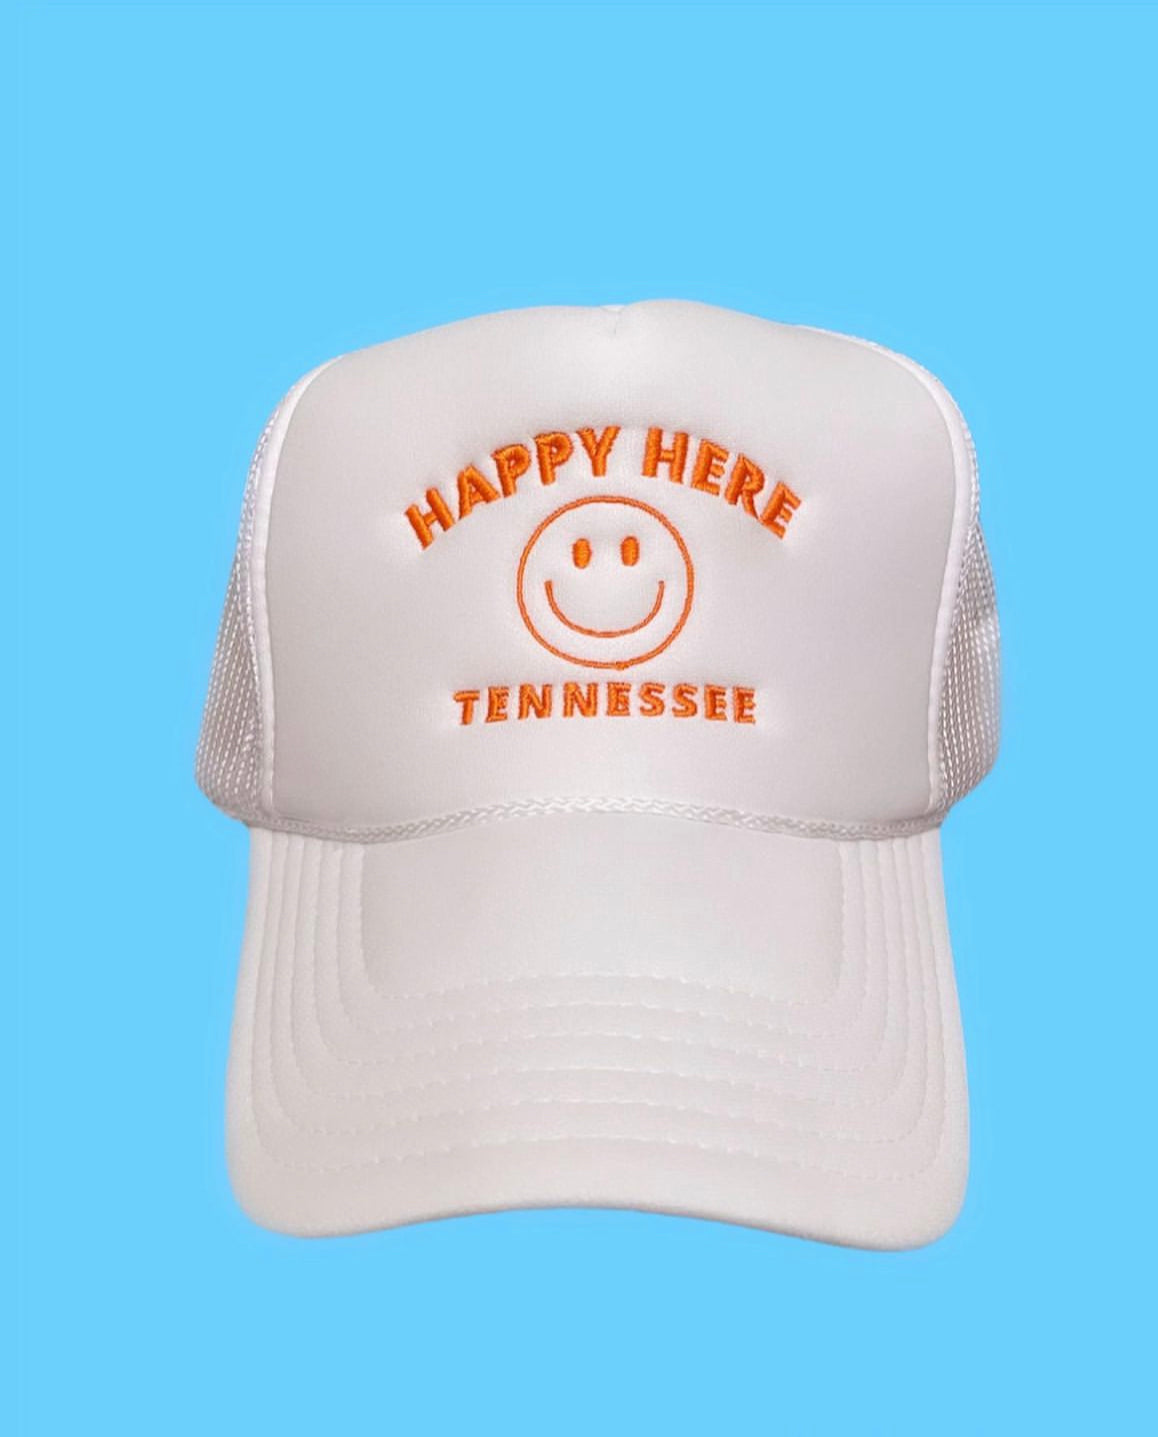 HAPPY HERE TENNESSEE Trucker Hat